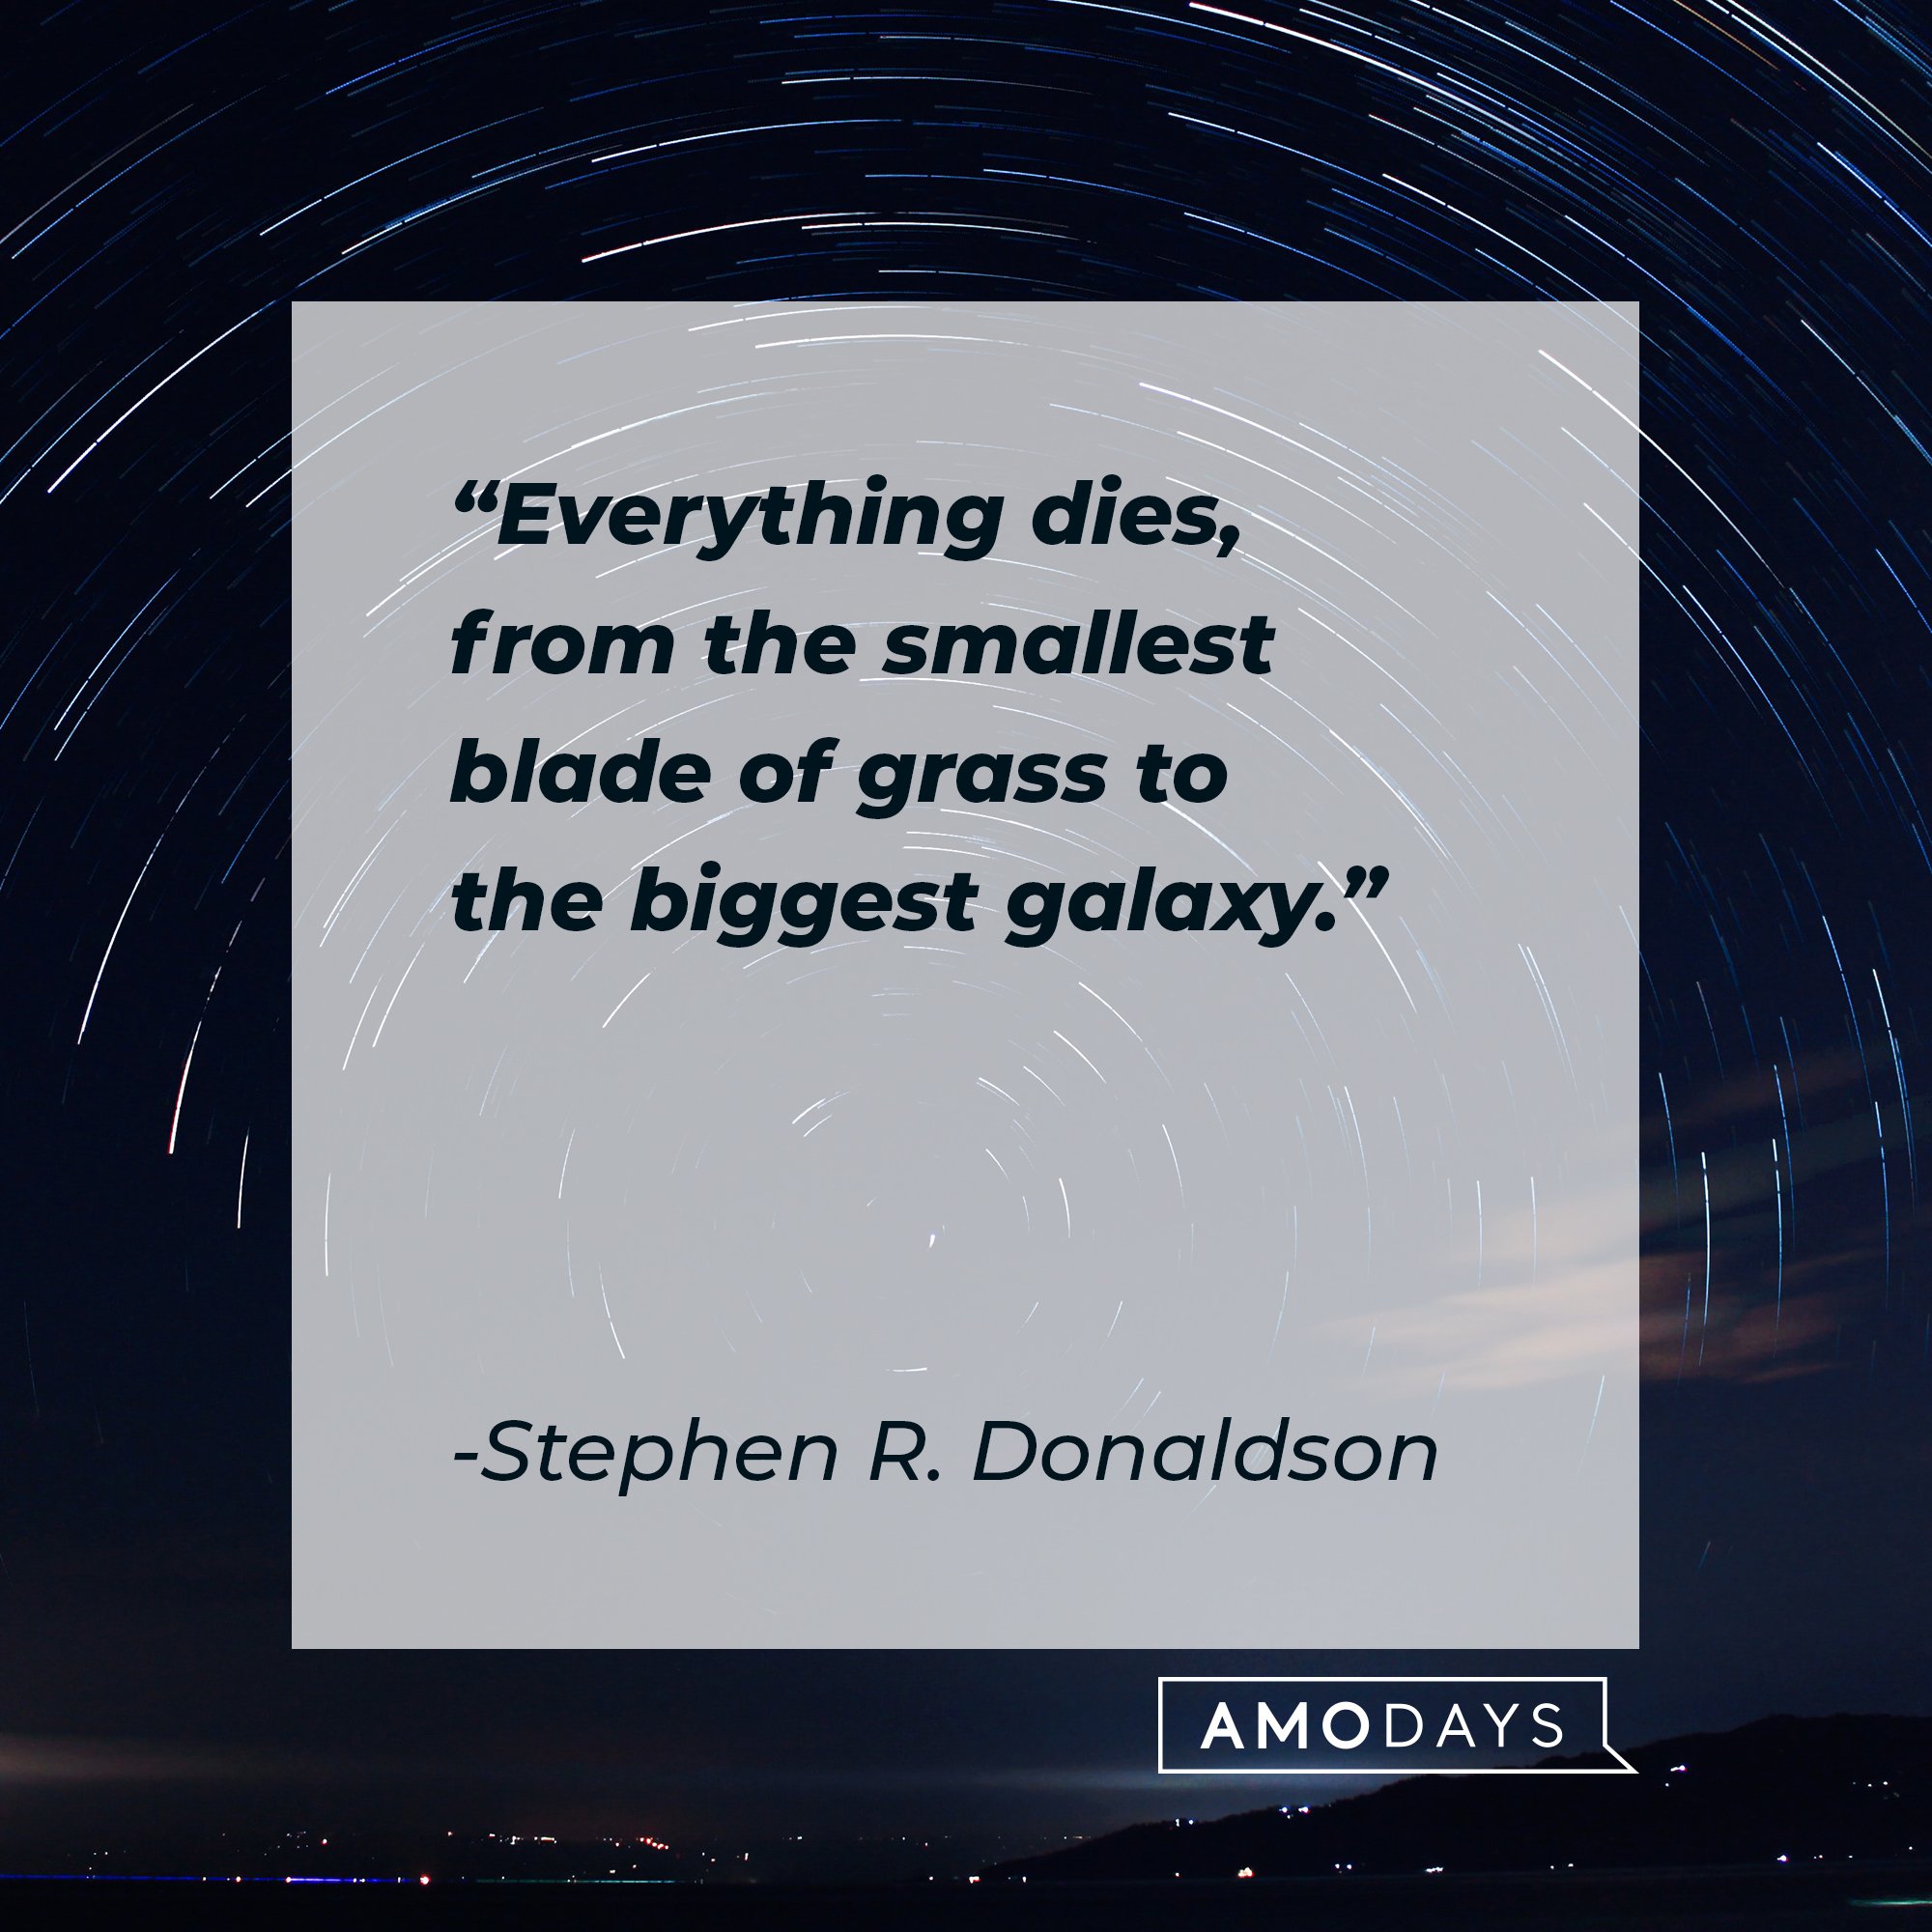 Stephen R. Donaldson’s quote: “Everything dies, from the smallest blade of grass to the biggest galaxy." | Image: AmoDays